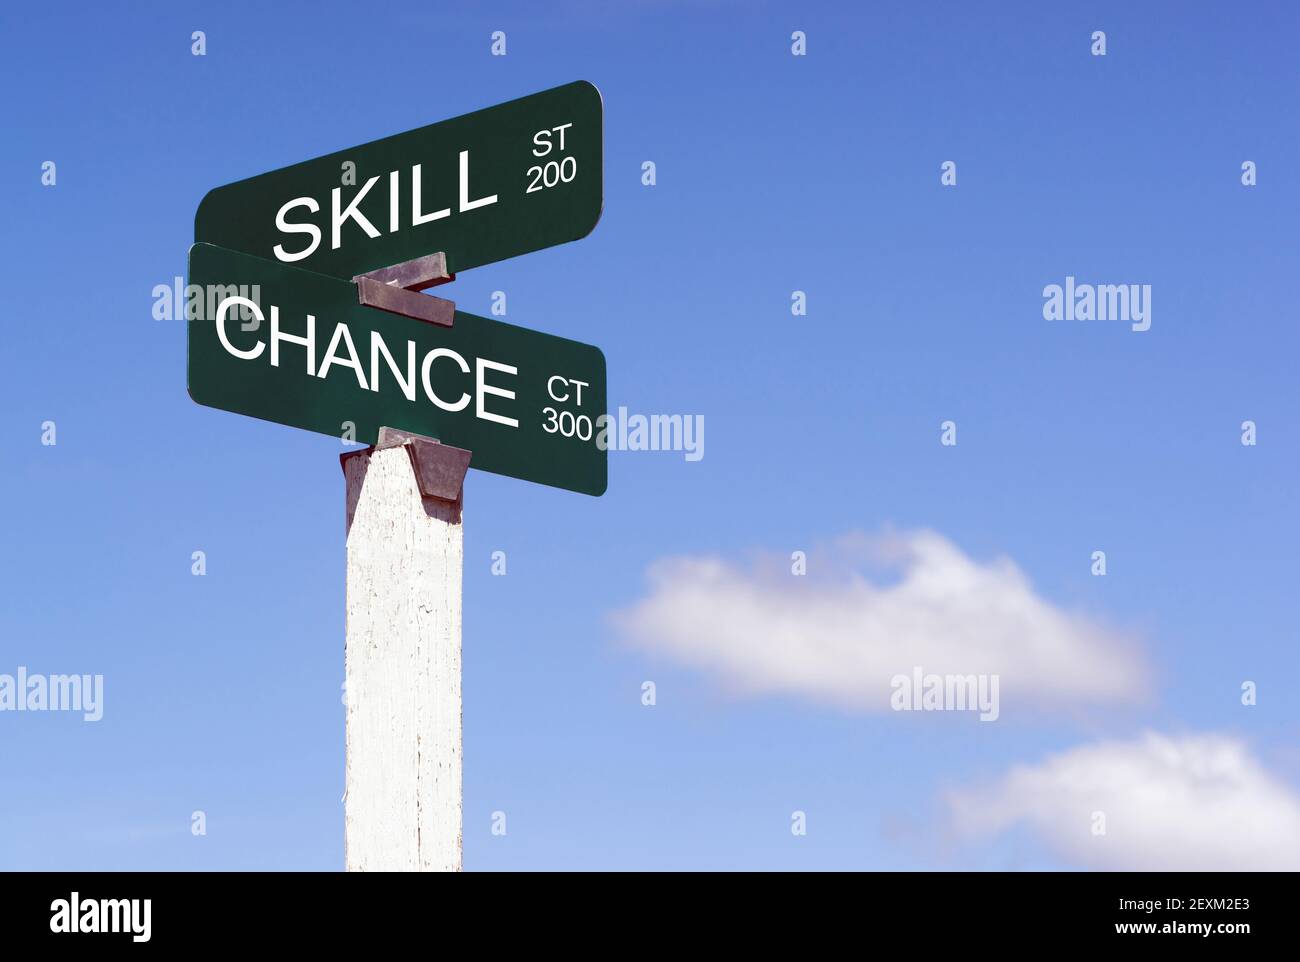 Signs Crossraods Skill Street Chance Avenue Sign Blue Skies Clouds Stock Photo